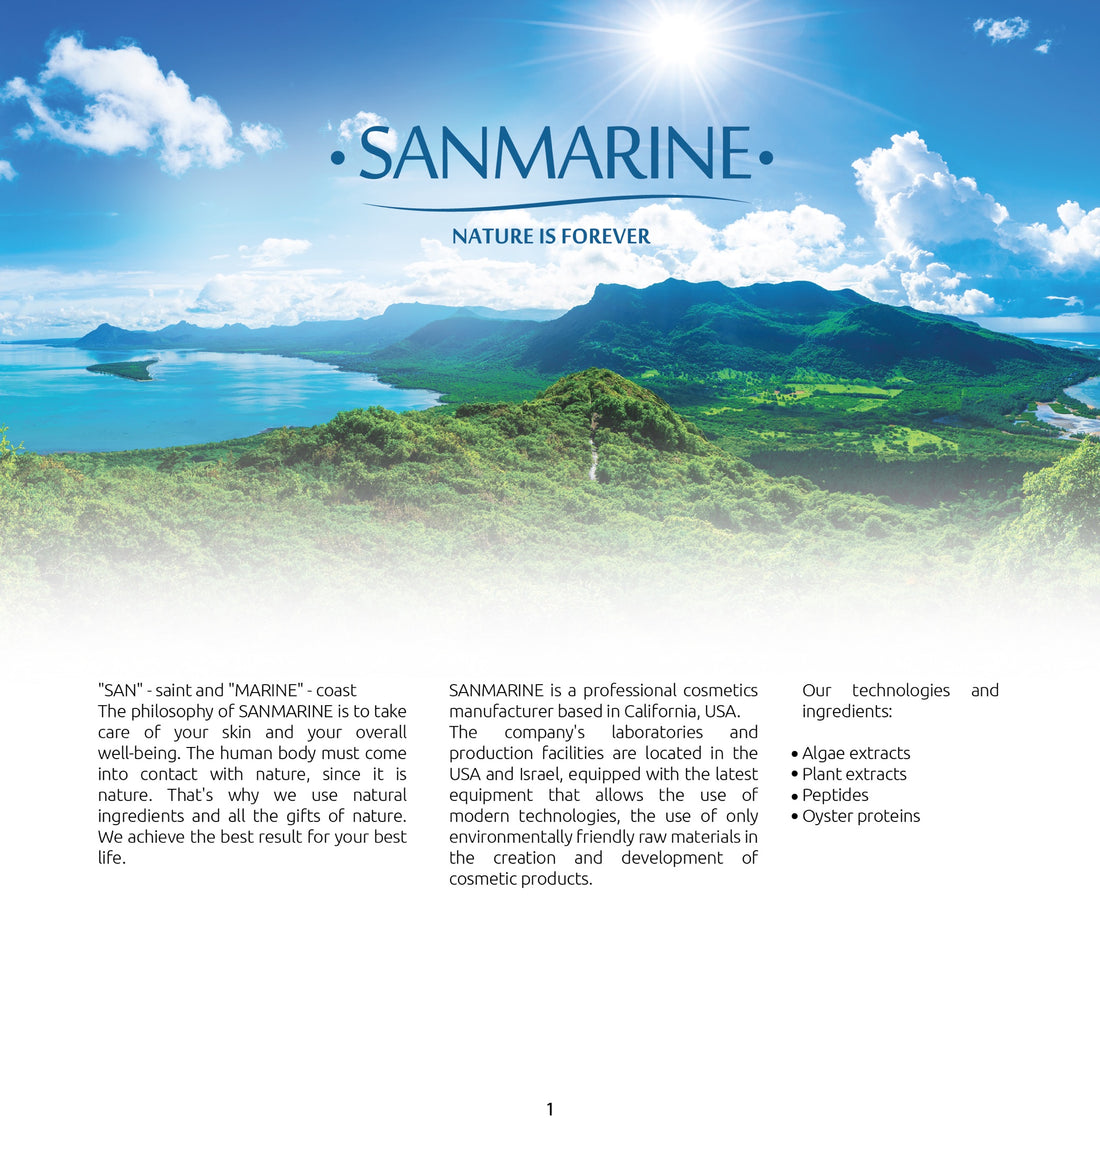 SanMarine Nature is Forever